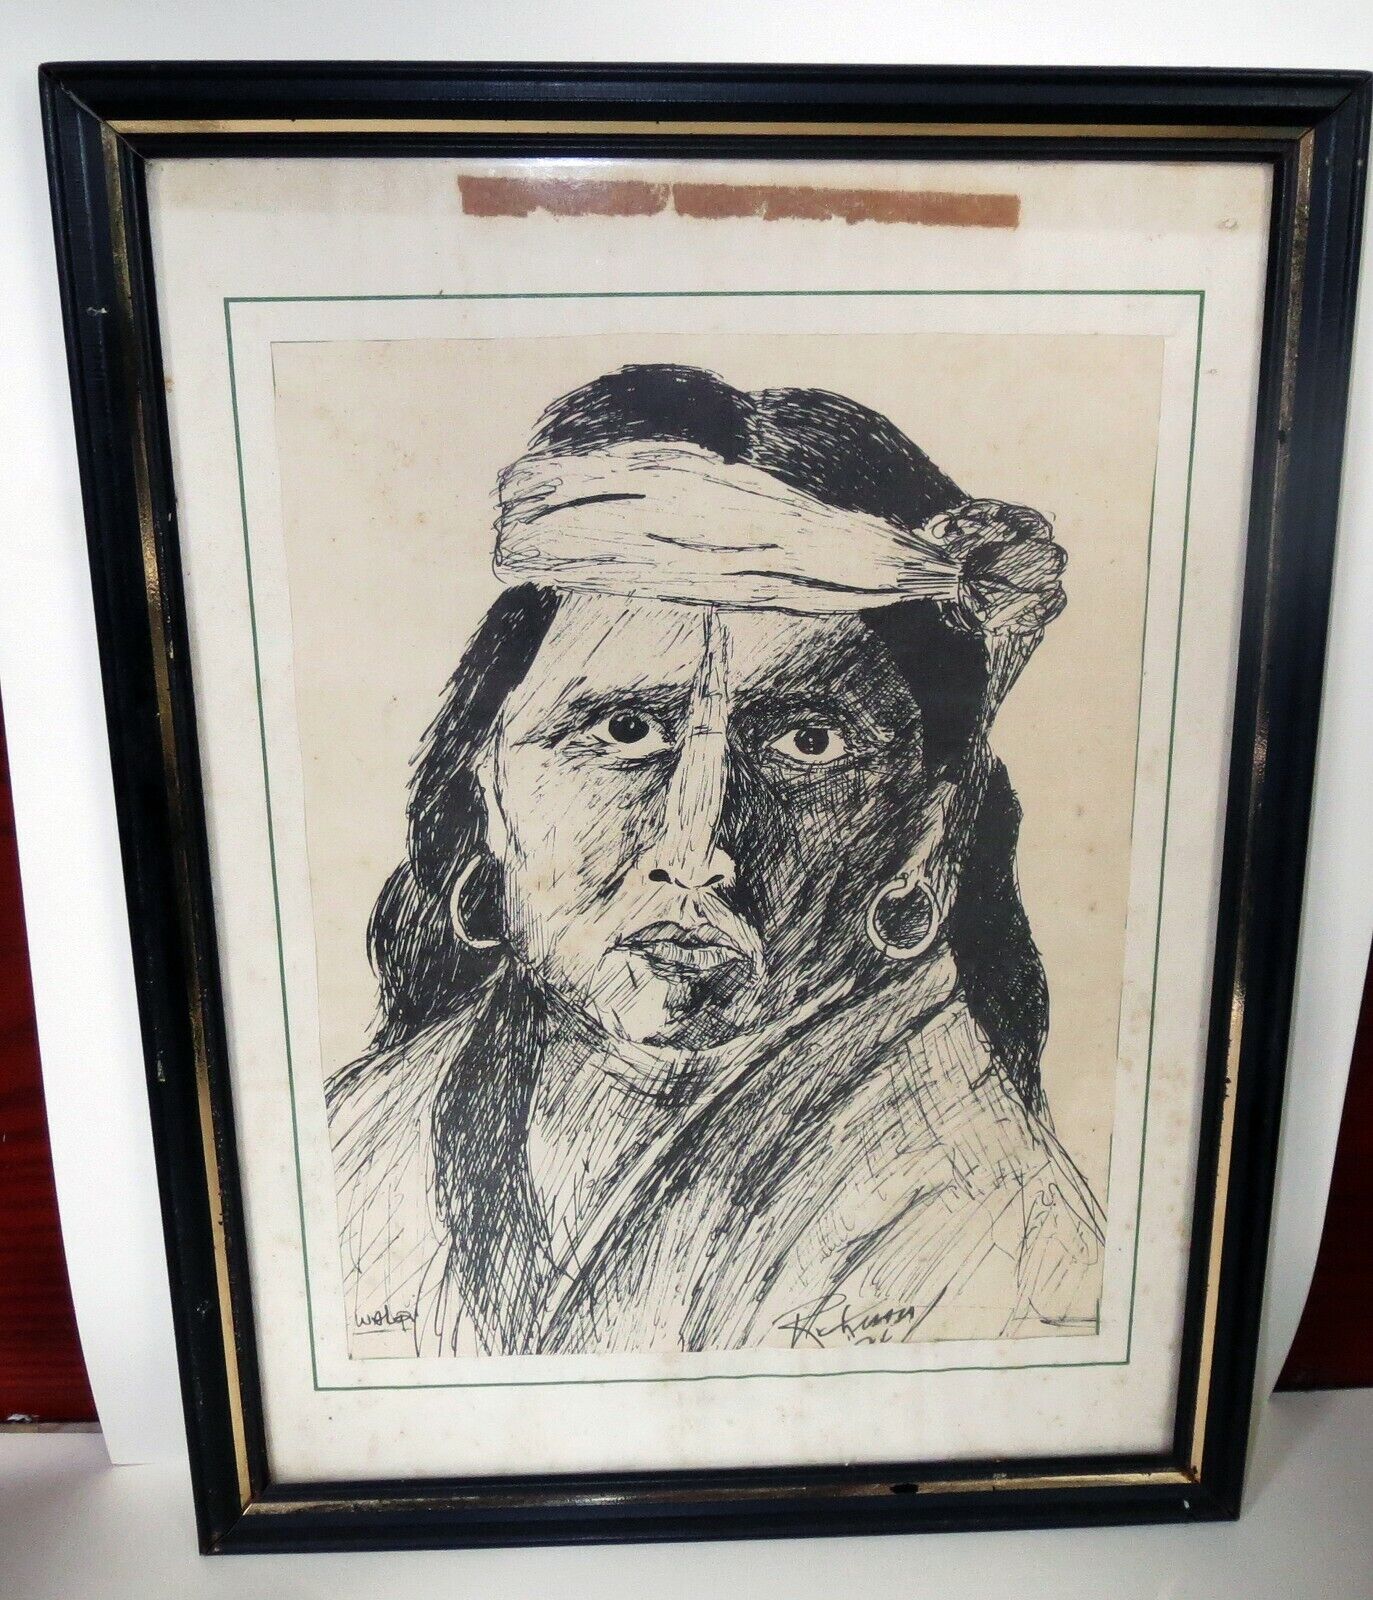 Antique GERONIMO APACHE INDIAN DOCUMENT Engraving - SIGNED On 1800s LAID PAPER